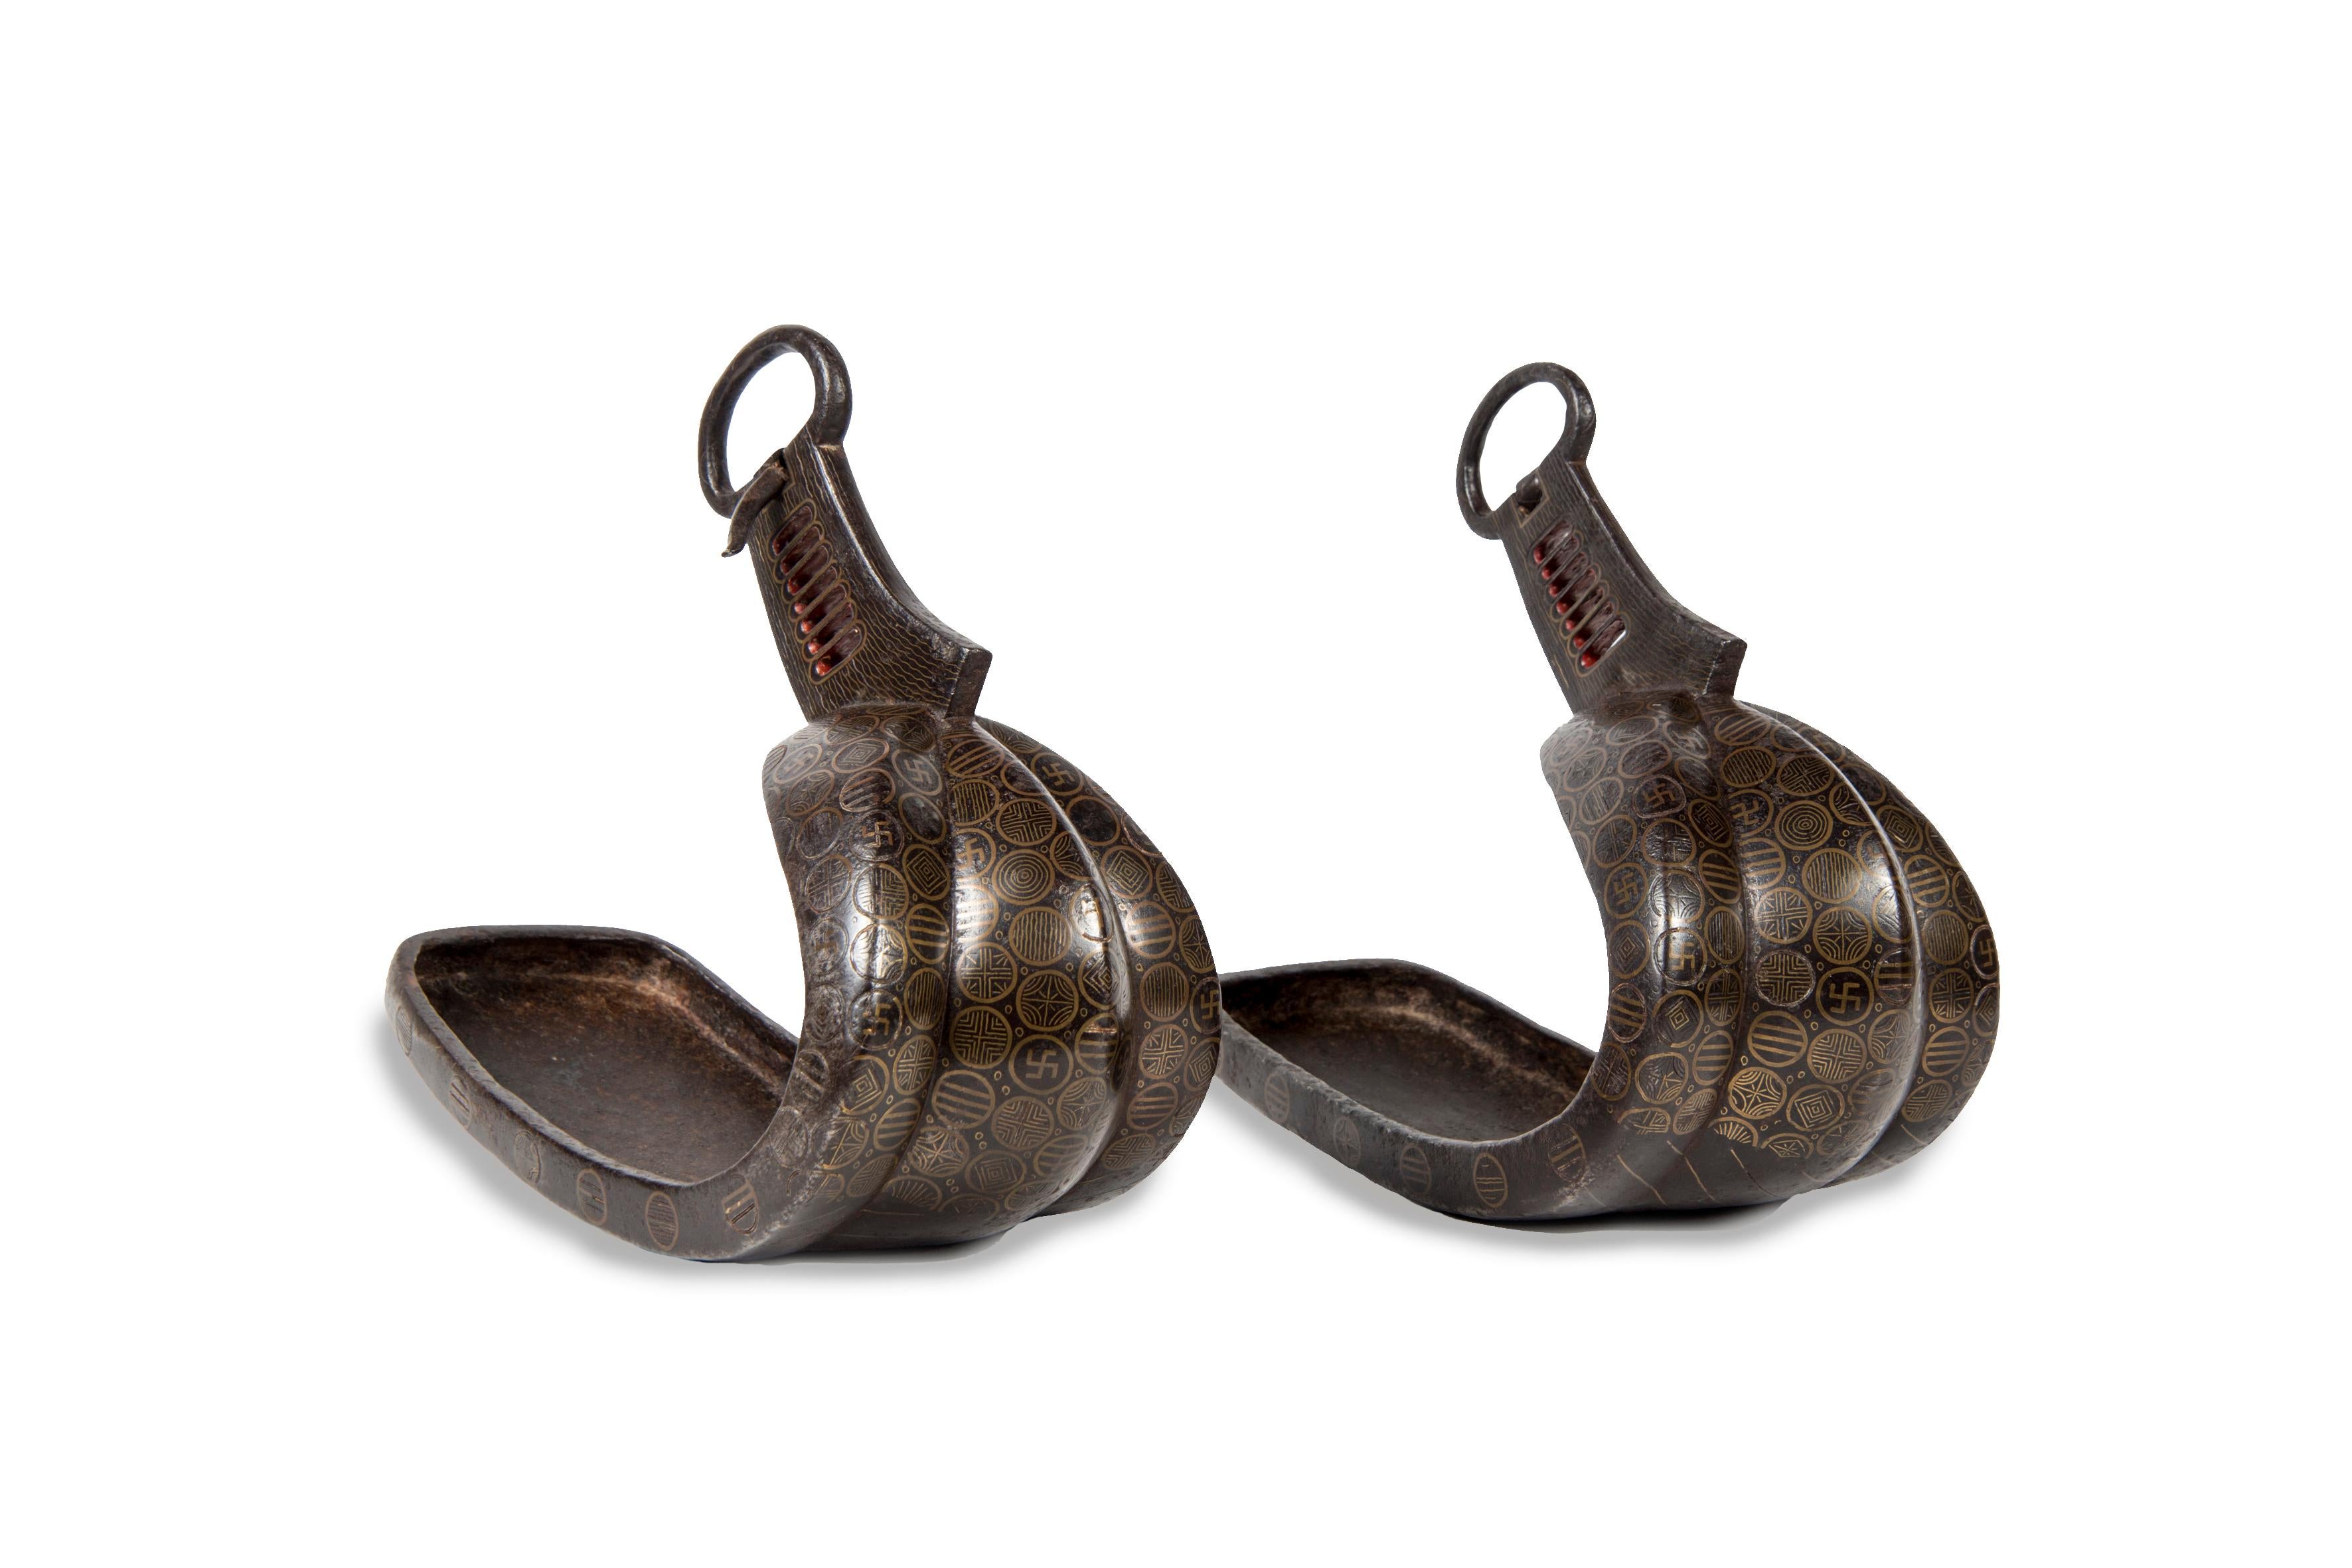 Pair of stamped brass stirrups decorated with Hashizuka, Ito and Manabe Mons. 

Japan - Edo (1615-1868), 18th century. 
Height: 10.24 in. (26 cm), length: 12.6 in. (32 cm), width 4.72 in. (12 cm)

 As in Western culture, the culture Japanese